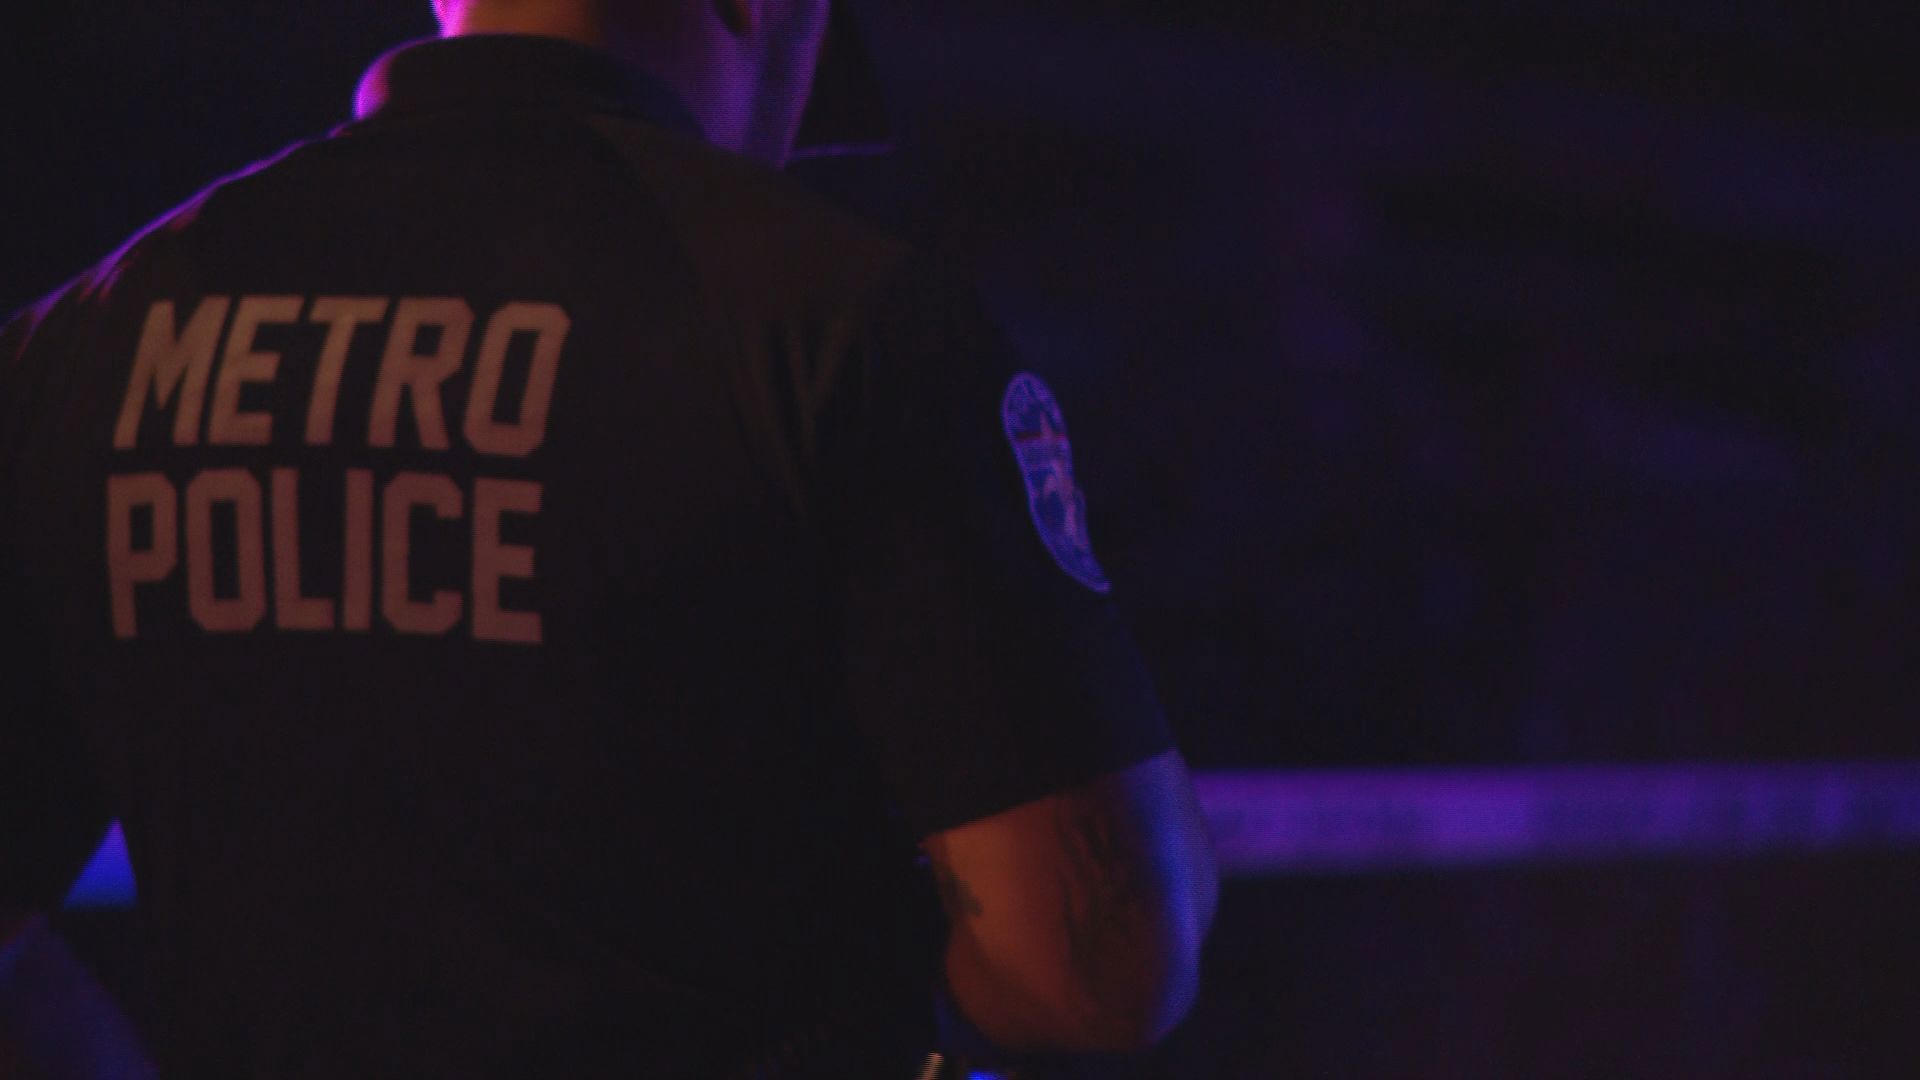 It was a violent night across the city Tuesday night. Combating the city's violence was part of the discussion at a Metro Council meeting on Wednesday.